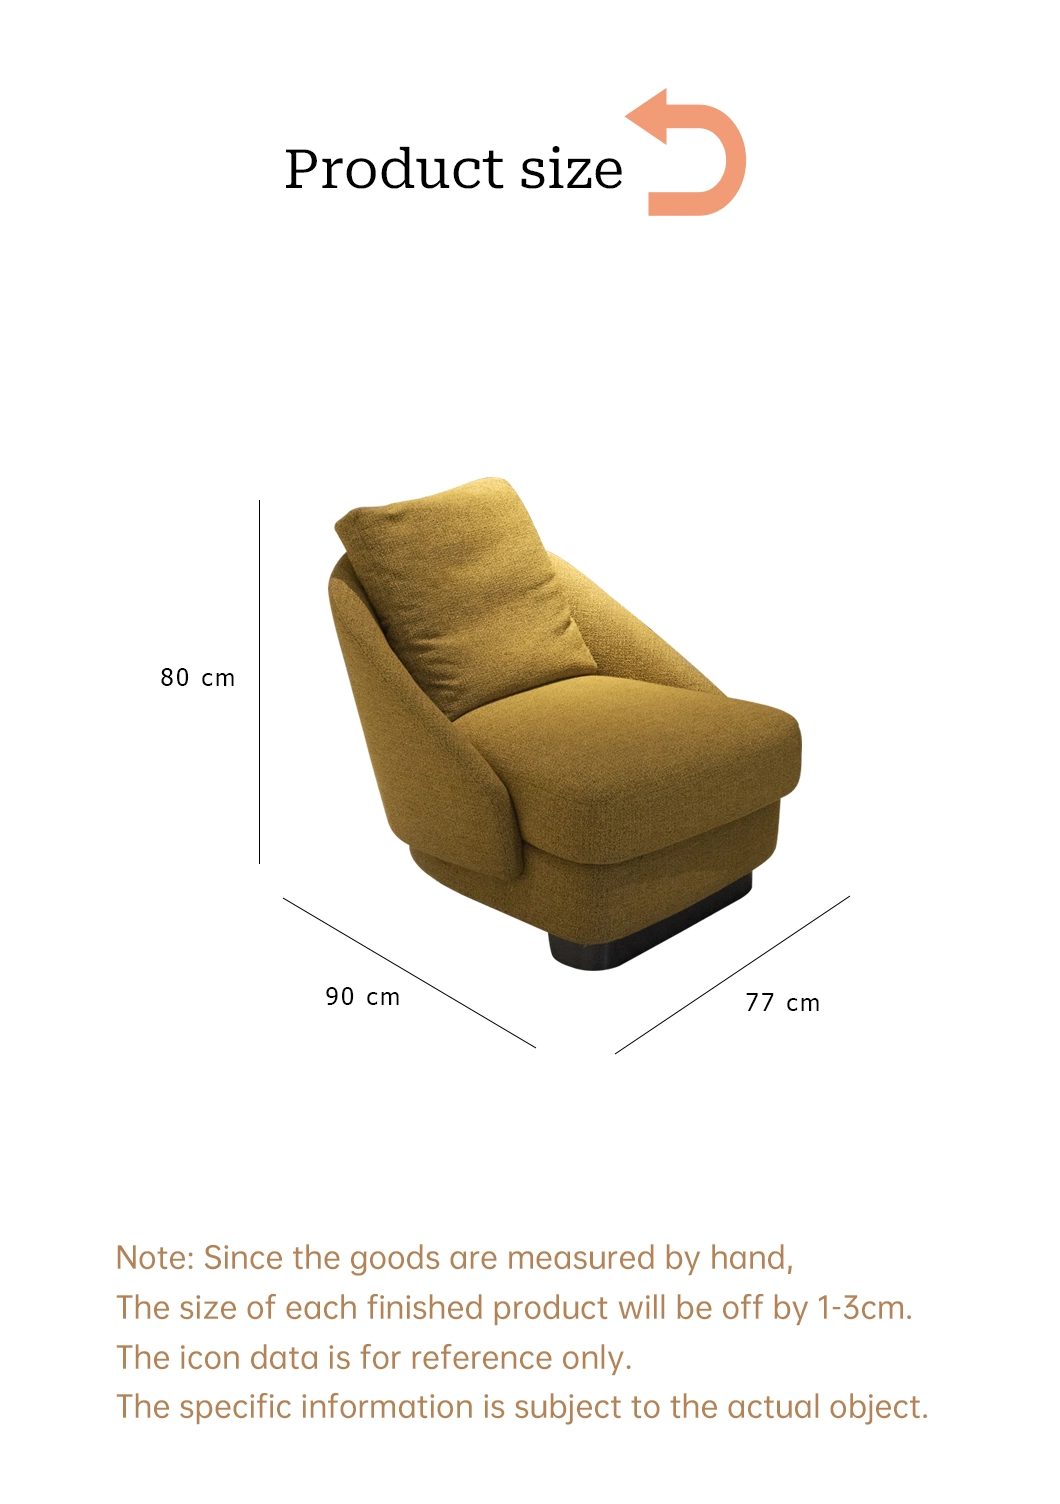 Home Furntiure Comfortable Relax Chair with Cushion for The Indoor Lounge Chair